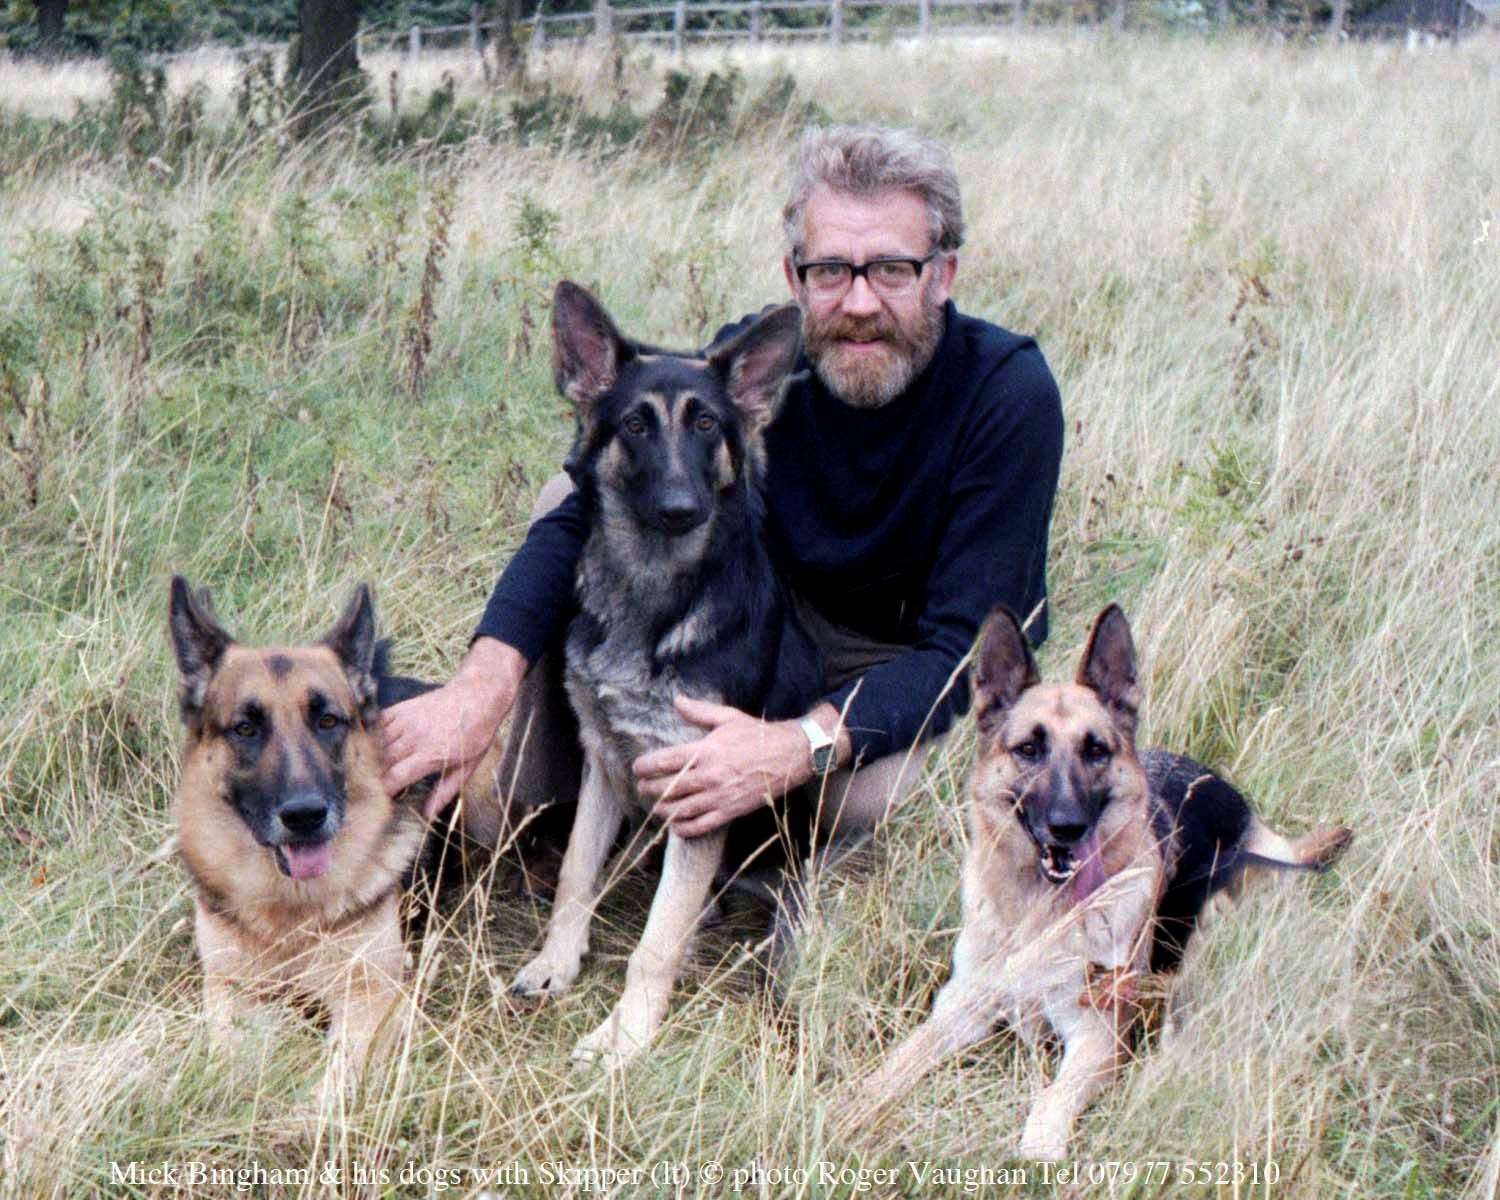 Mick Bingham and his dogs. Picture: Roger Vaughan